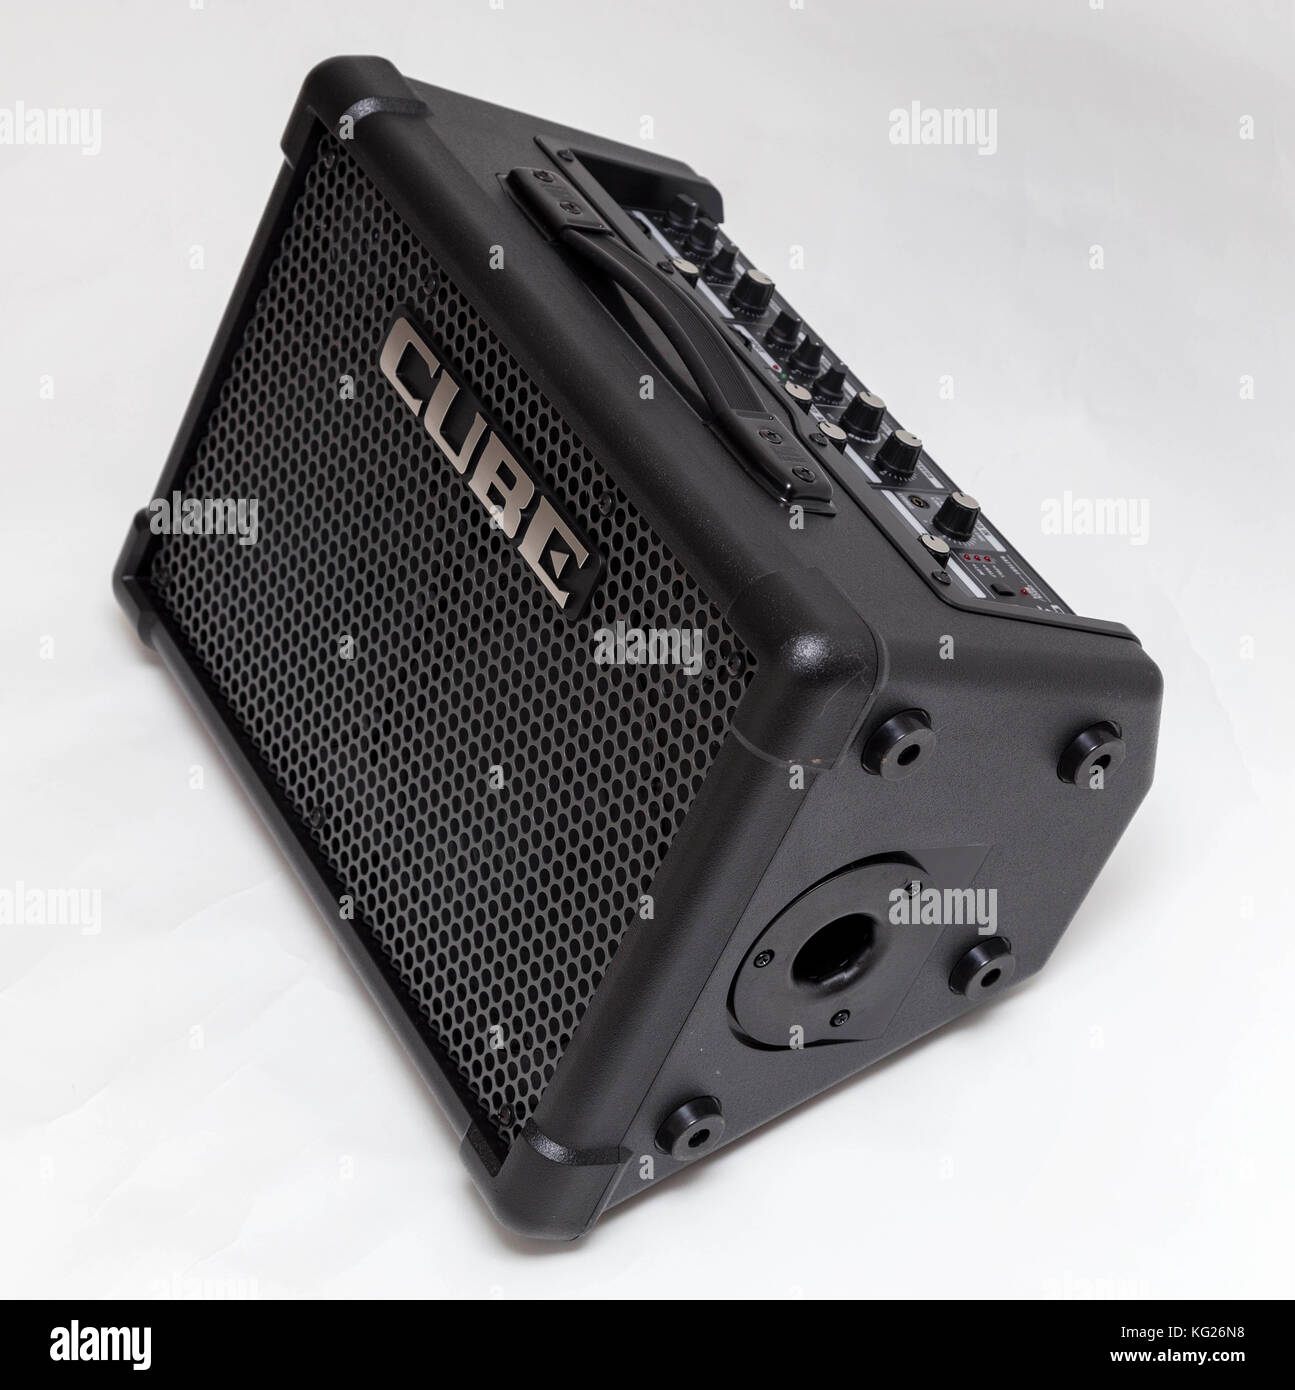 cube busking amp,Quality assurance,protein-burger.com